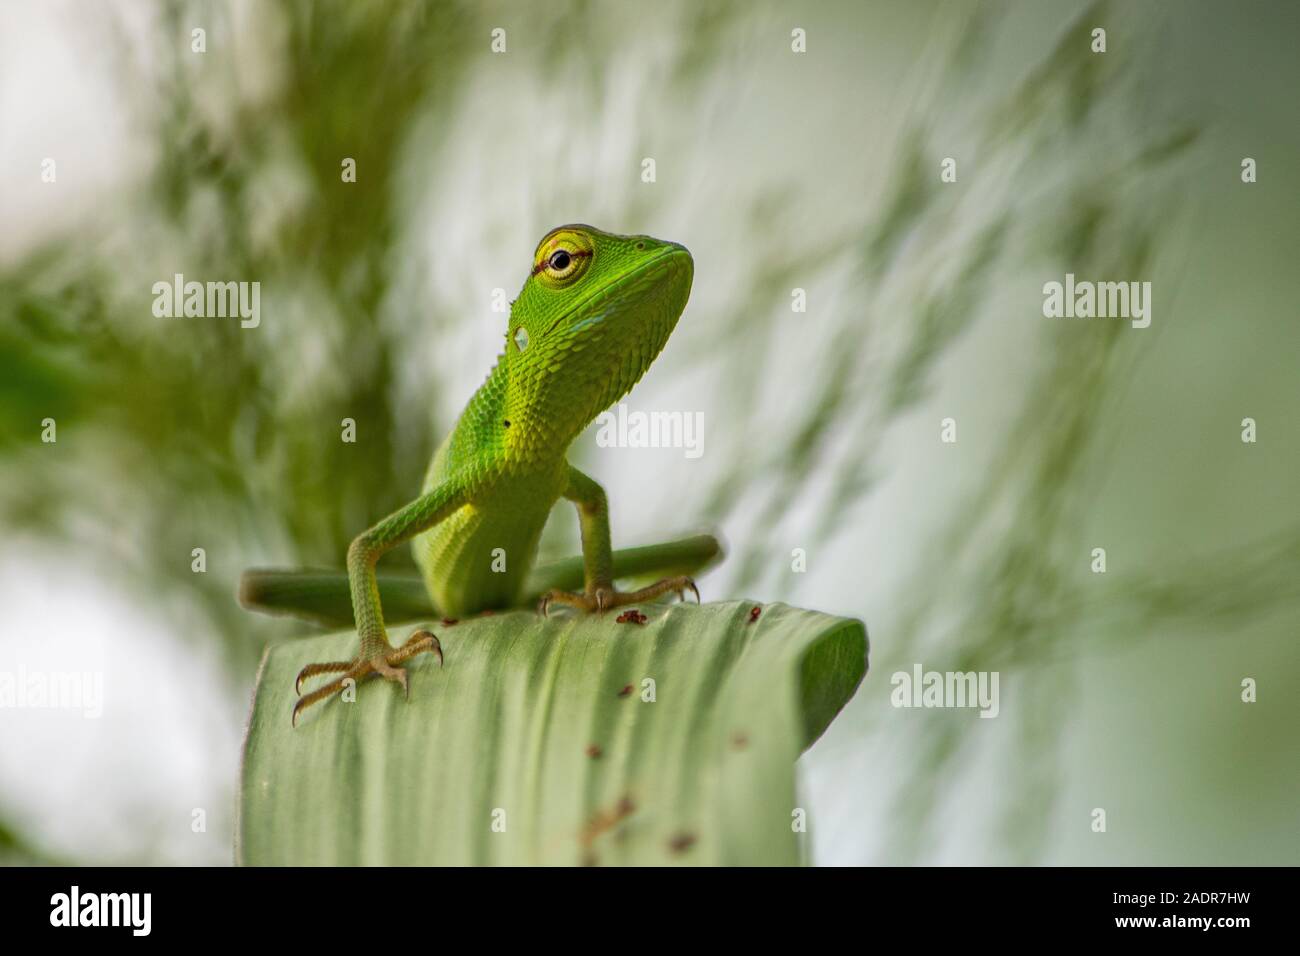 Lizards are a widespread group of squamate reptiles, with over 6,000 species,ranging across all continents except Antarctica, as well as most oceanic Stock Photo